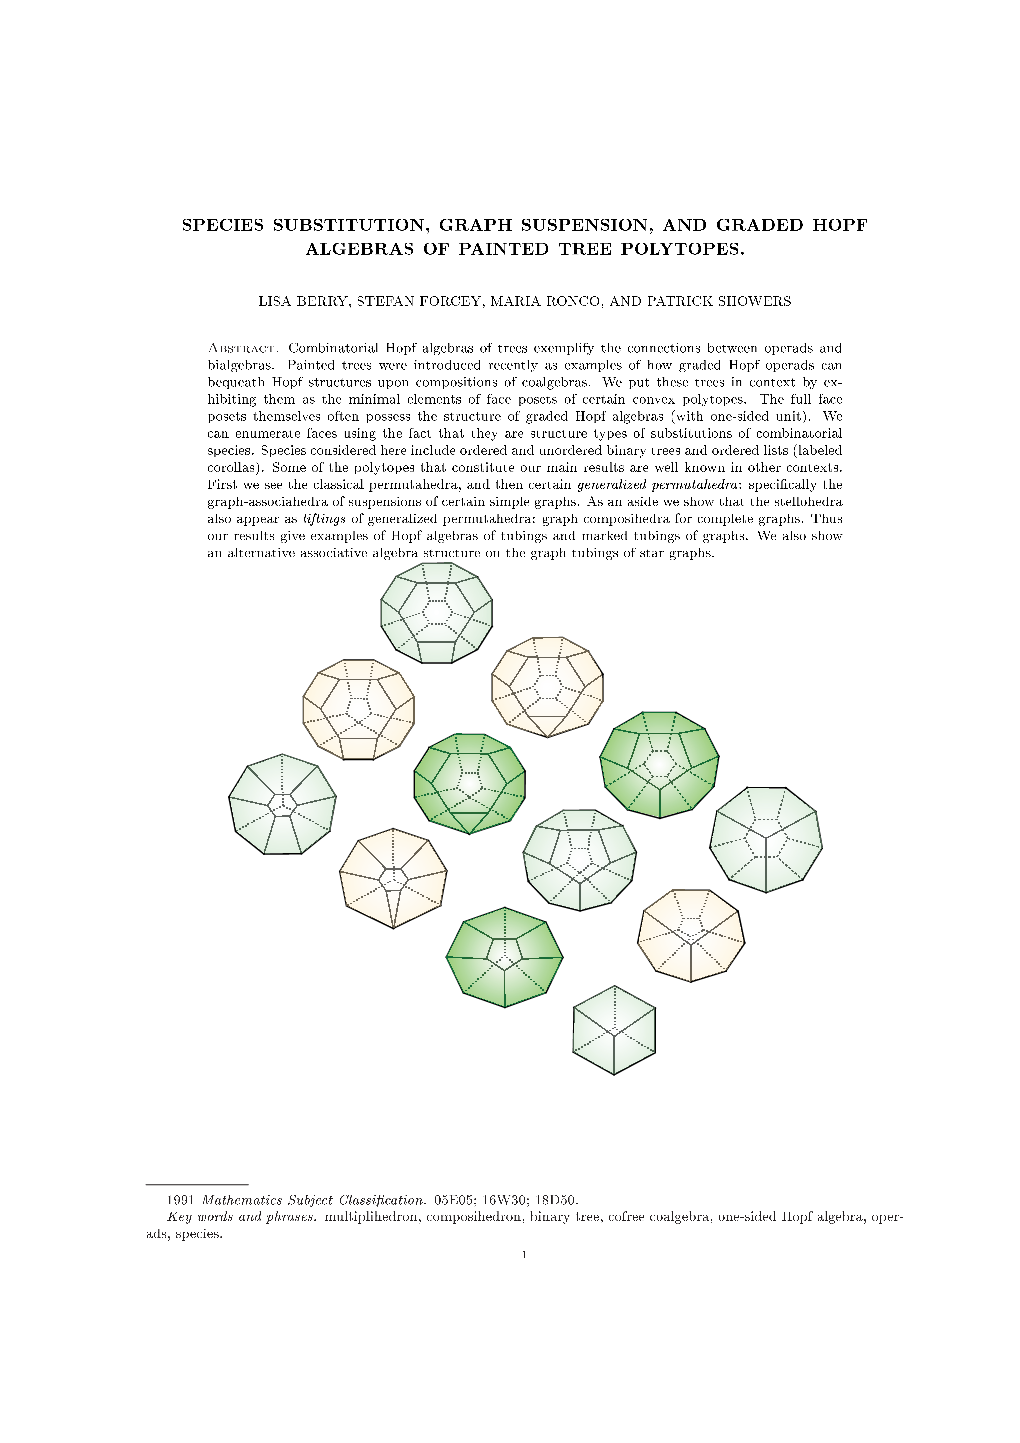 Species Substitution, Graph Suspension, and Graded Hopf Algebras of Painted Tree Polytopes